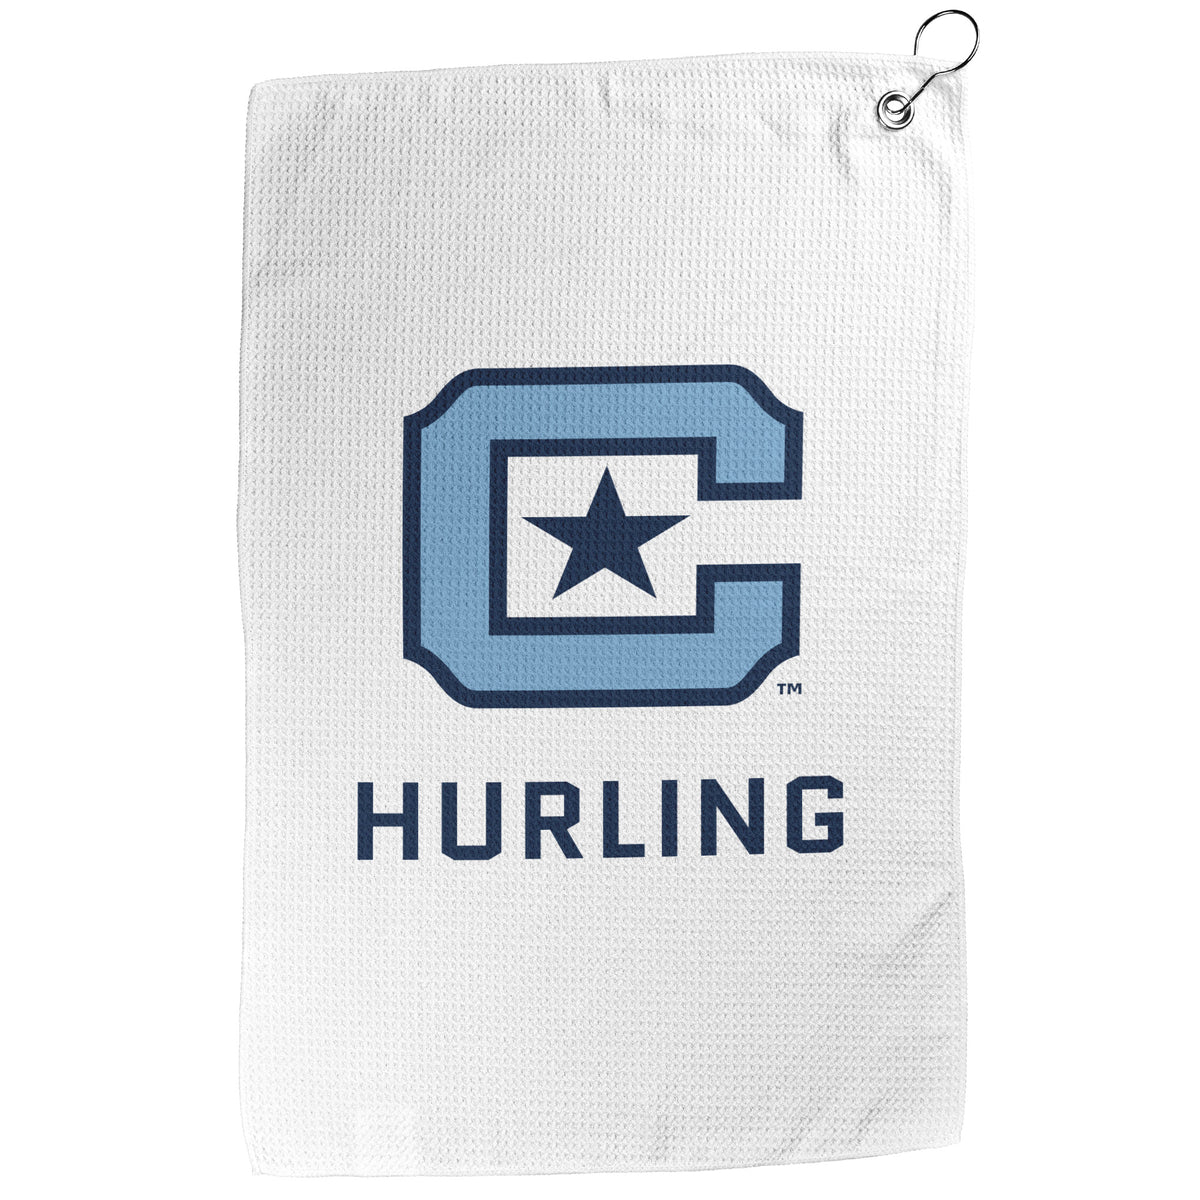 The Citadel, Club Sports Hurling, Double Sided Golf Towel